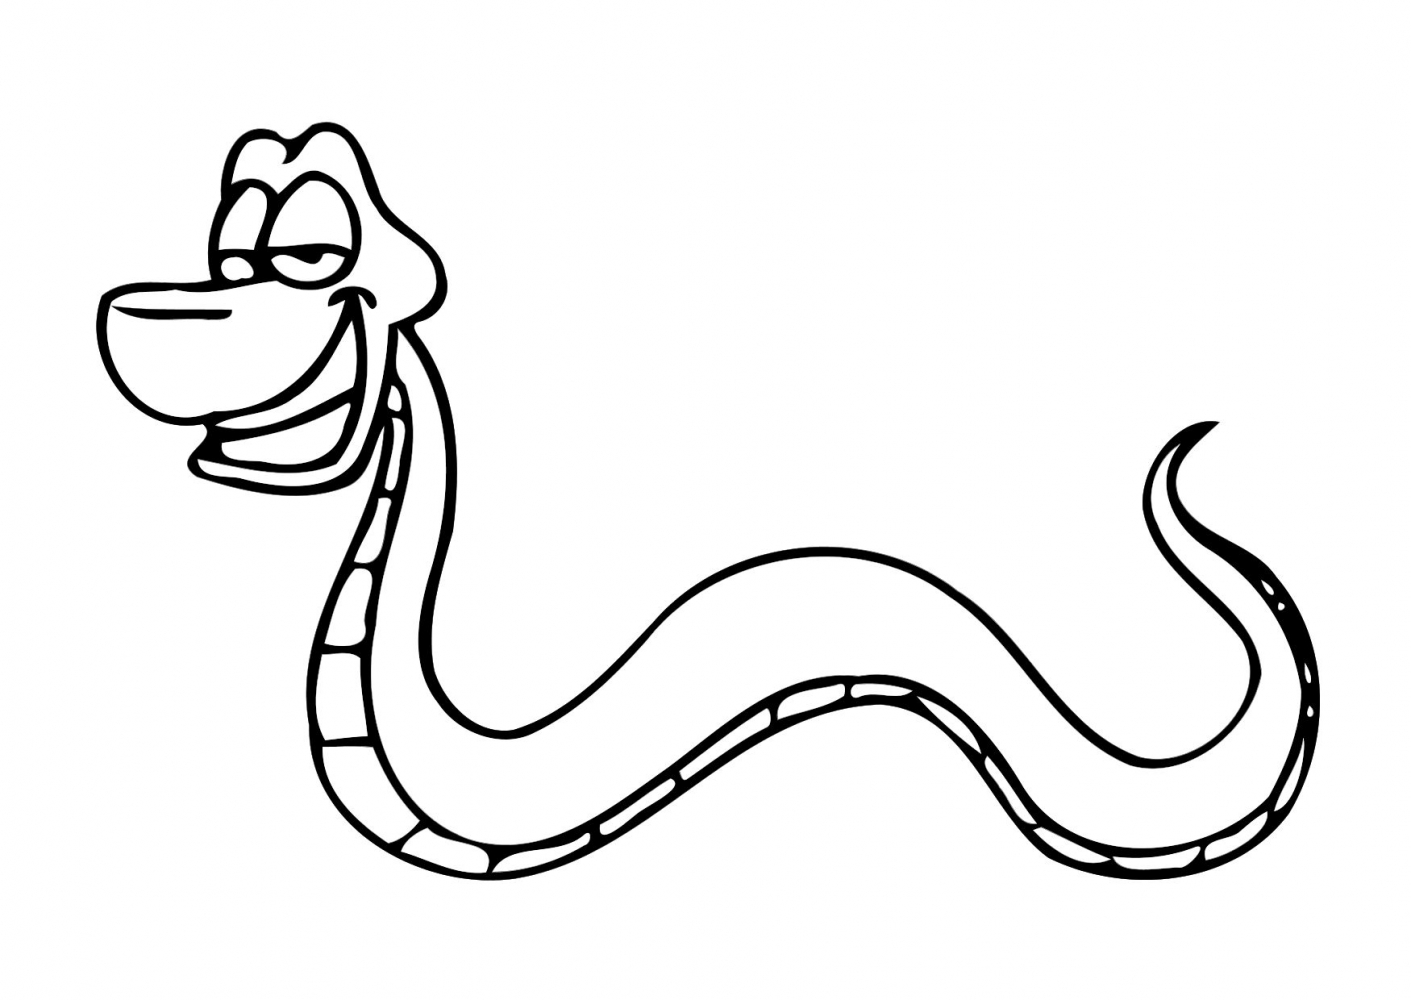 children helping snake Colouring Pages